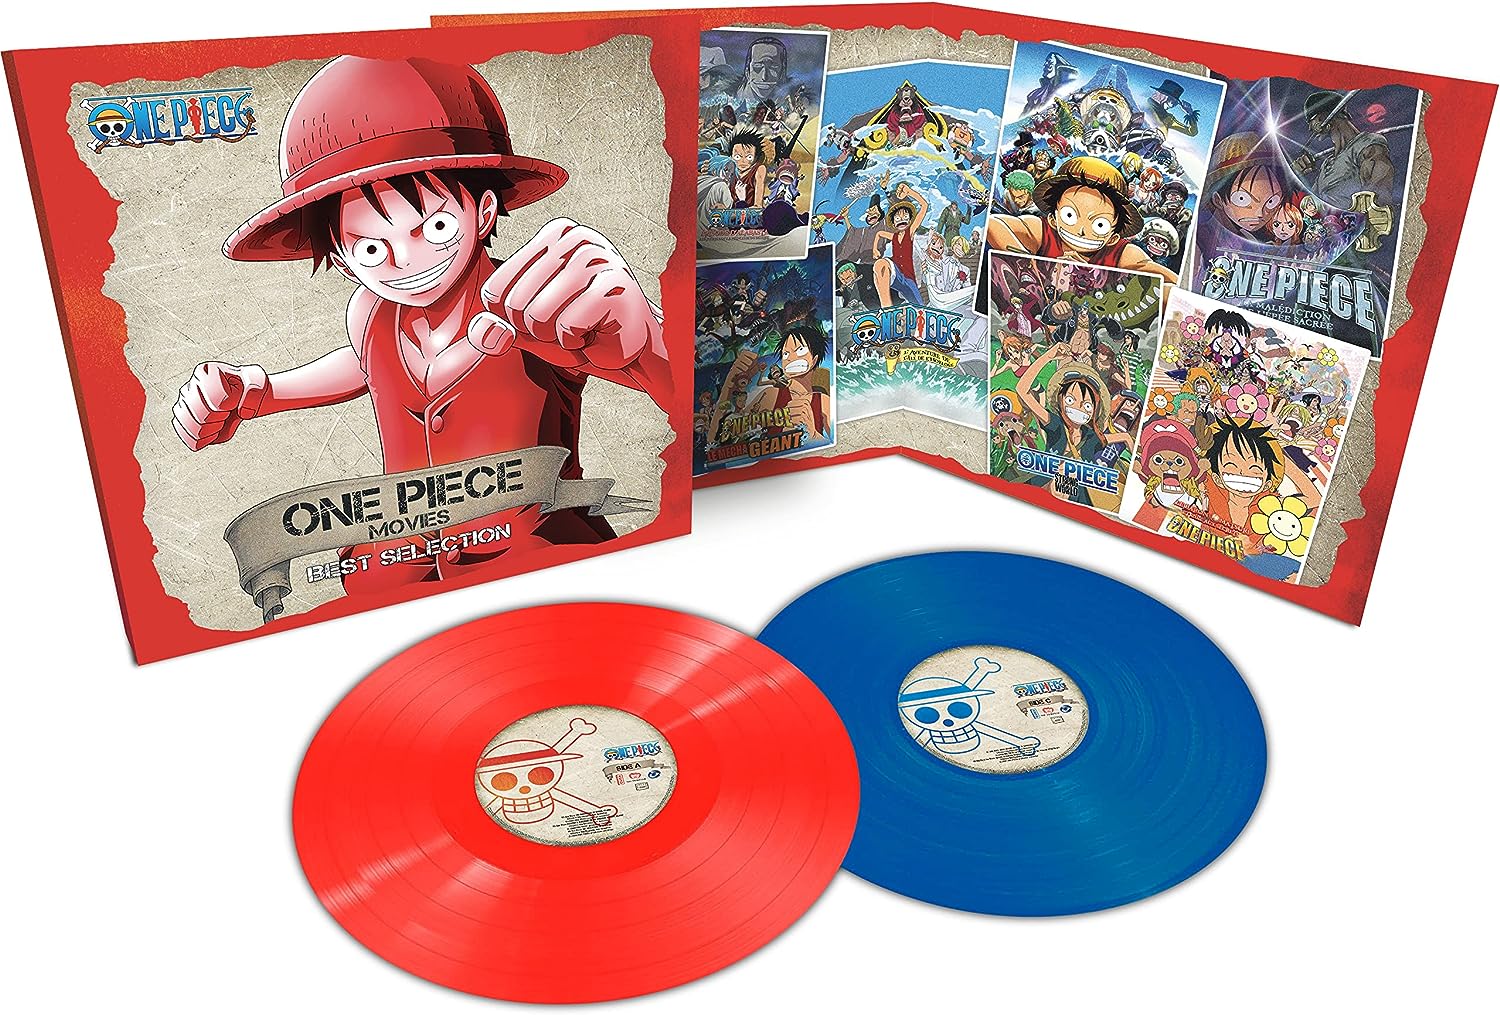 (ANIMATION MUSIC) / (アニメーション音楽) / ONE PIECE MOVIES BEST SELECTION - LIMITED EDITION RED + BLUE VINYL / ONE PIECE MOVIES BEST SELECTION - LIMITED EDITION RED + BLUE VINYL